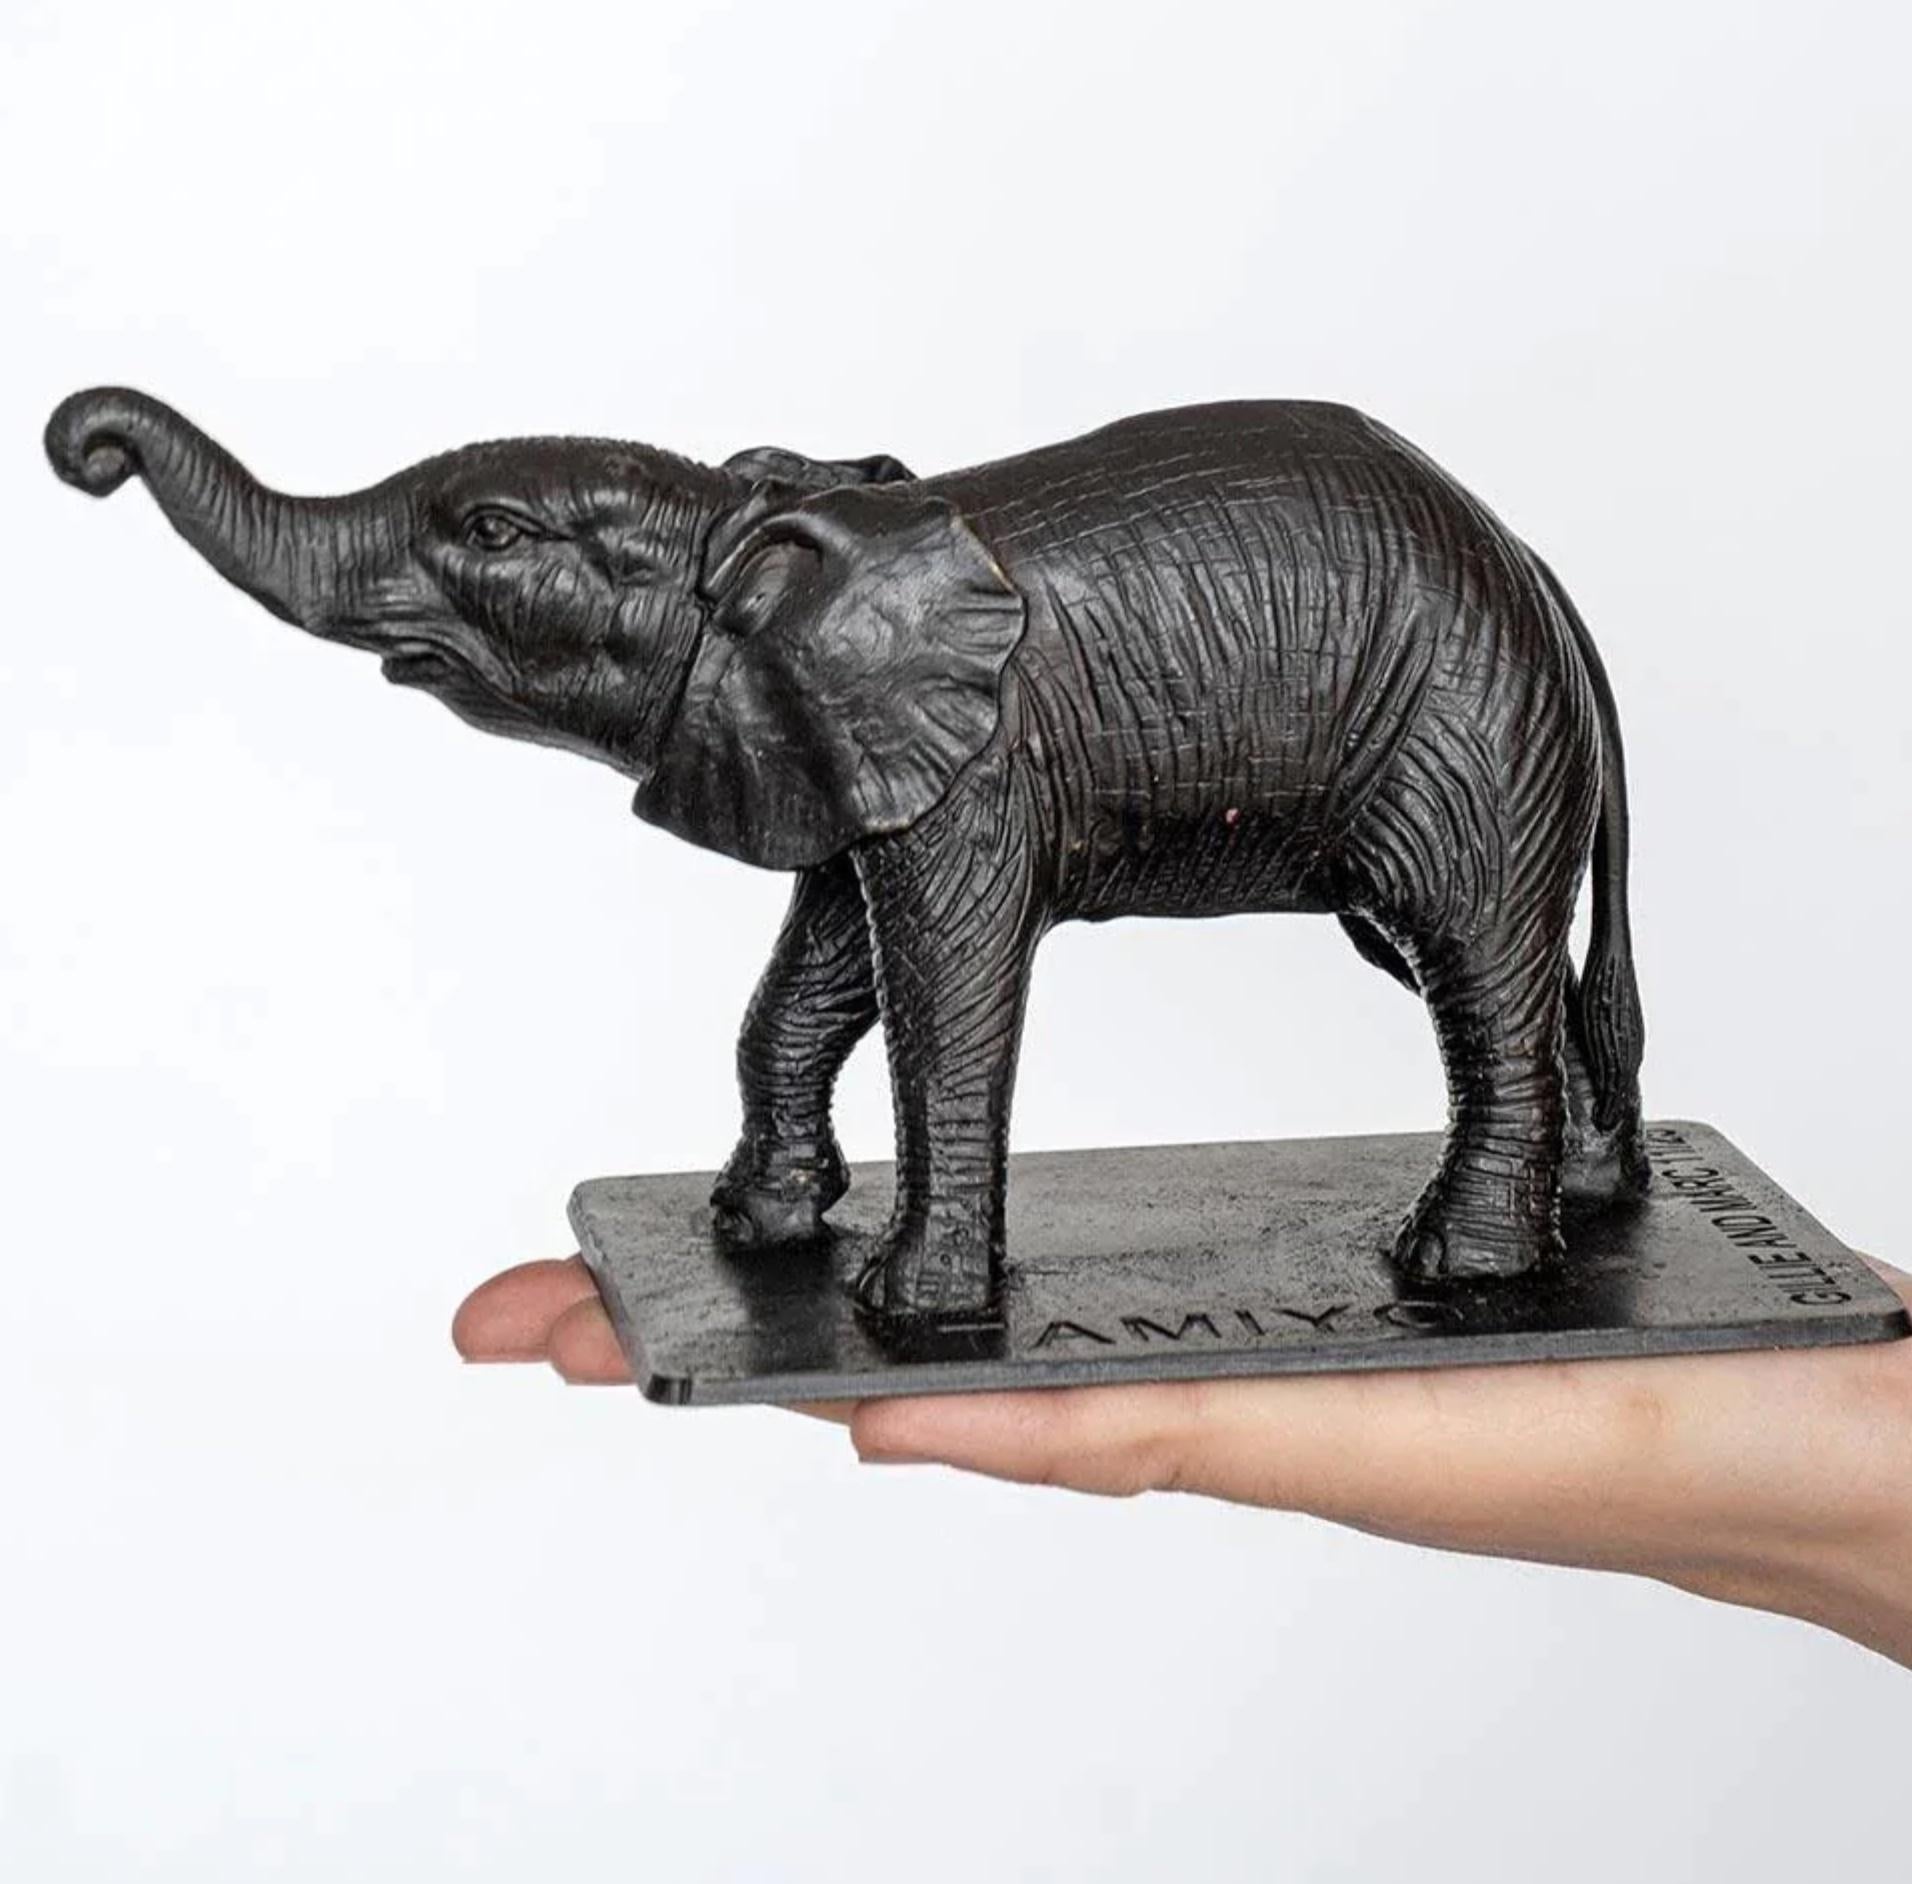 Gillie and Marc Schattner Figurative Sculpture - Authentic Bronze Orphan Tamiyoi Elephant Sculpture by Gillie and Marc